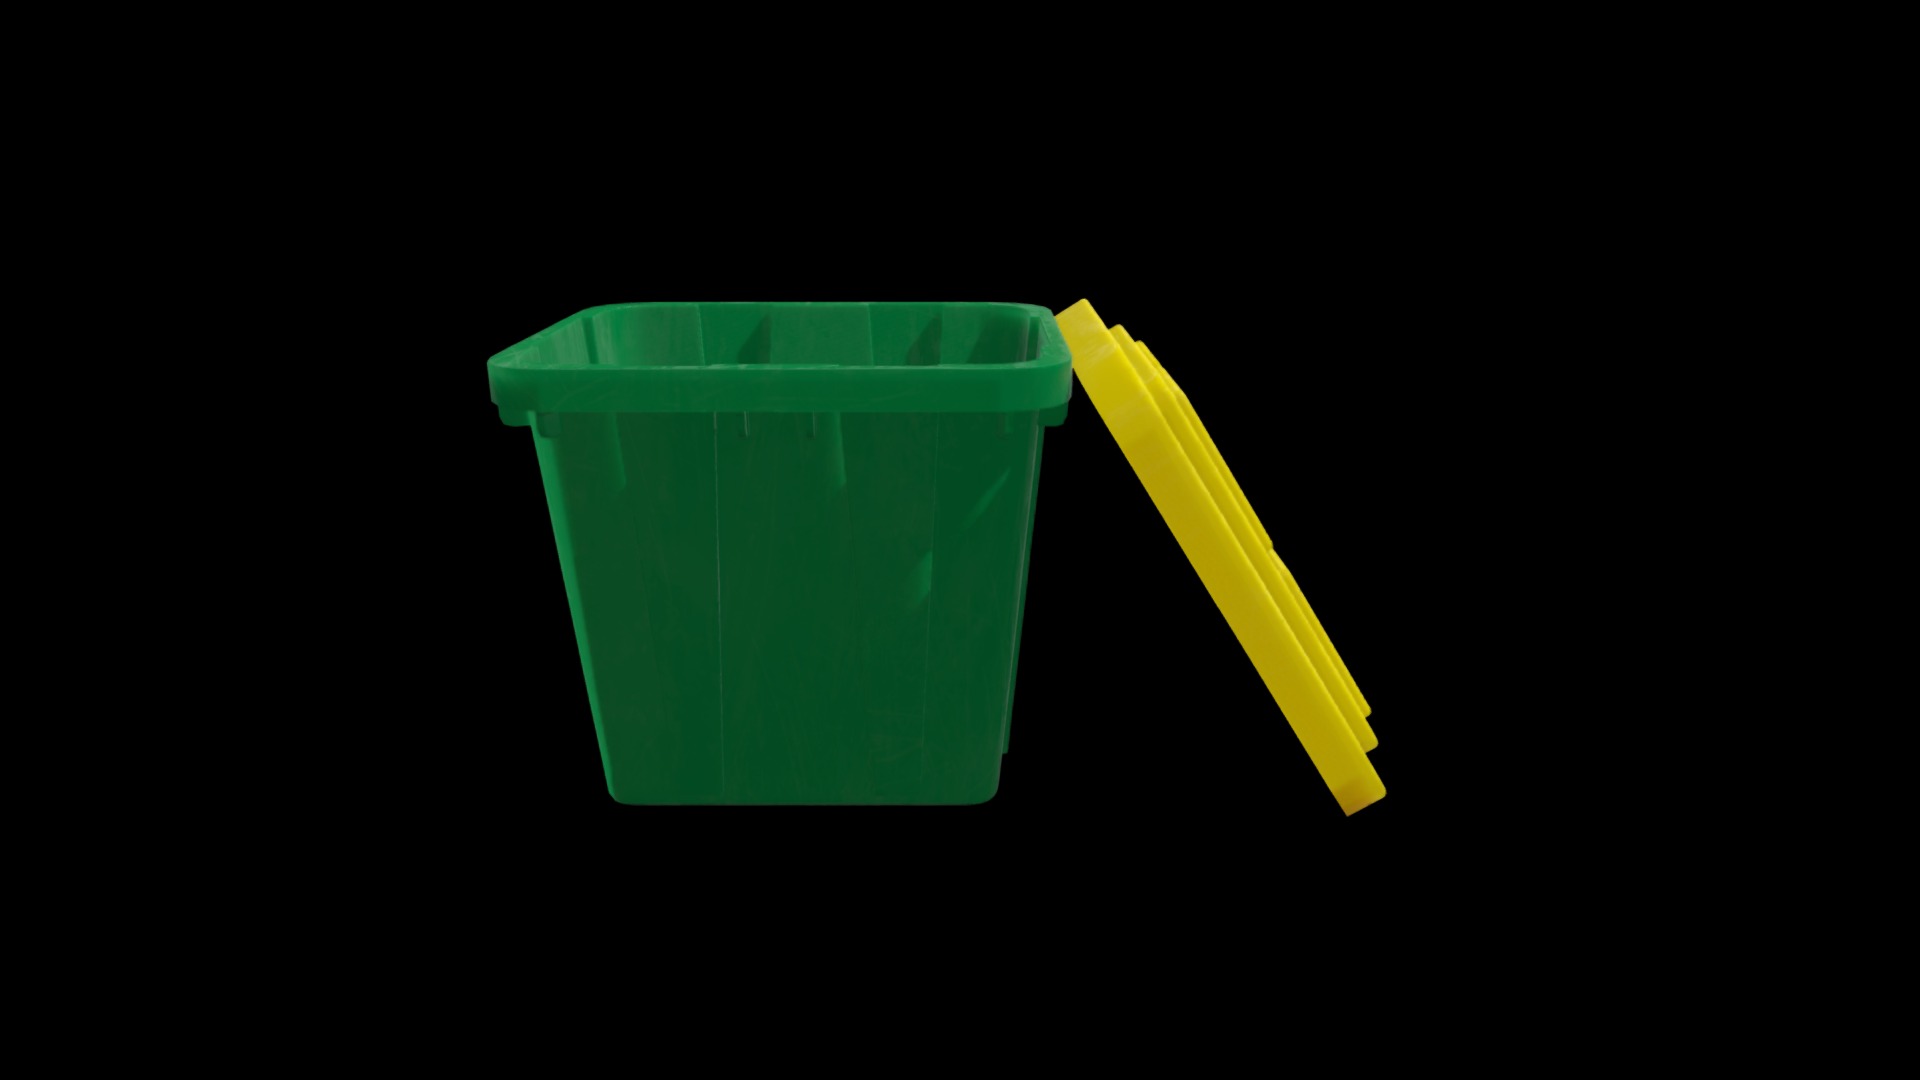 3D model Recycle Bin – Low Detail - This is a 3D model of the Recycle Bin - Low Detail. The 3D model is about a green plastic container with a yellow handle.